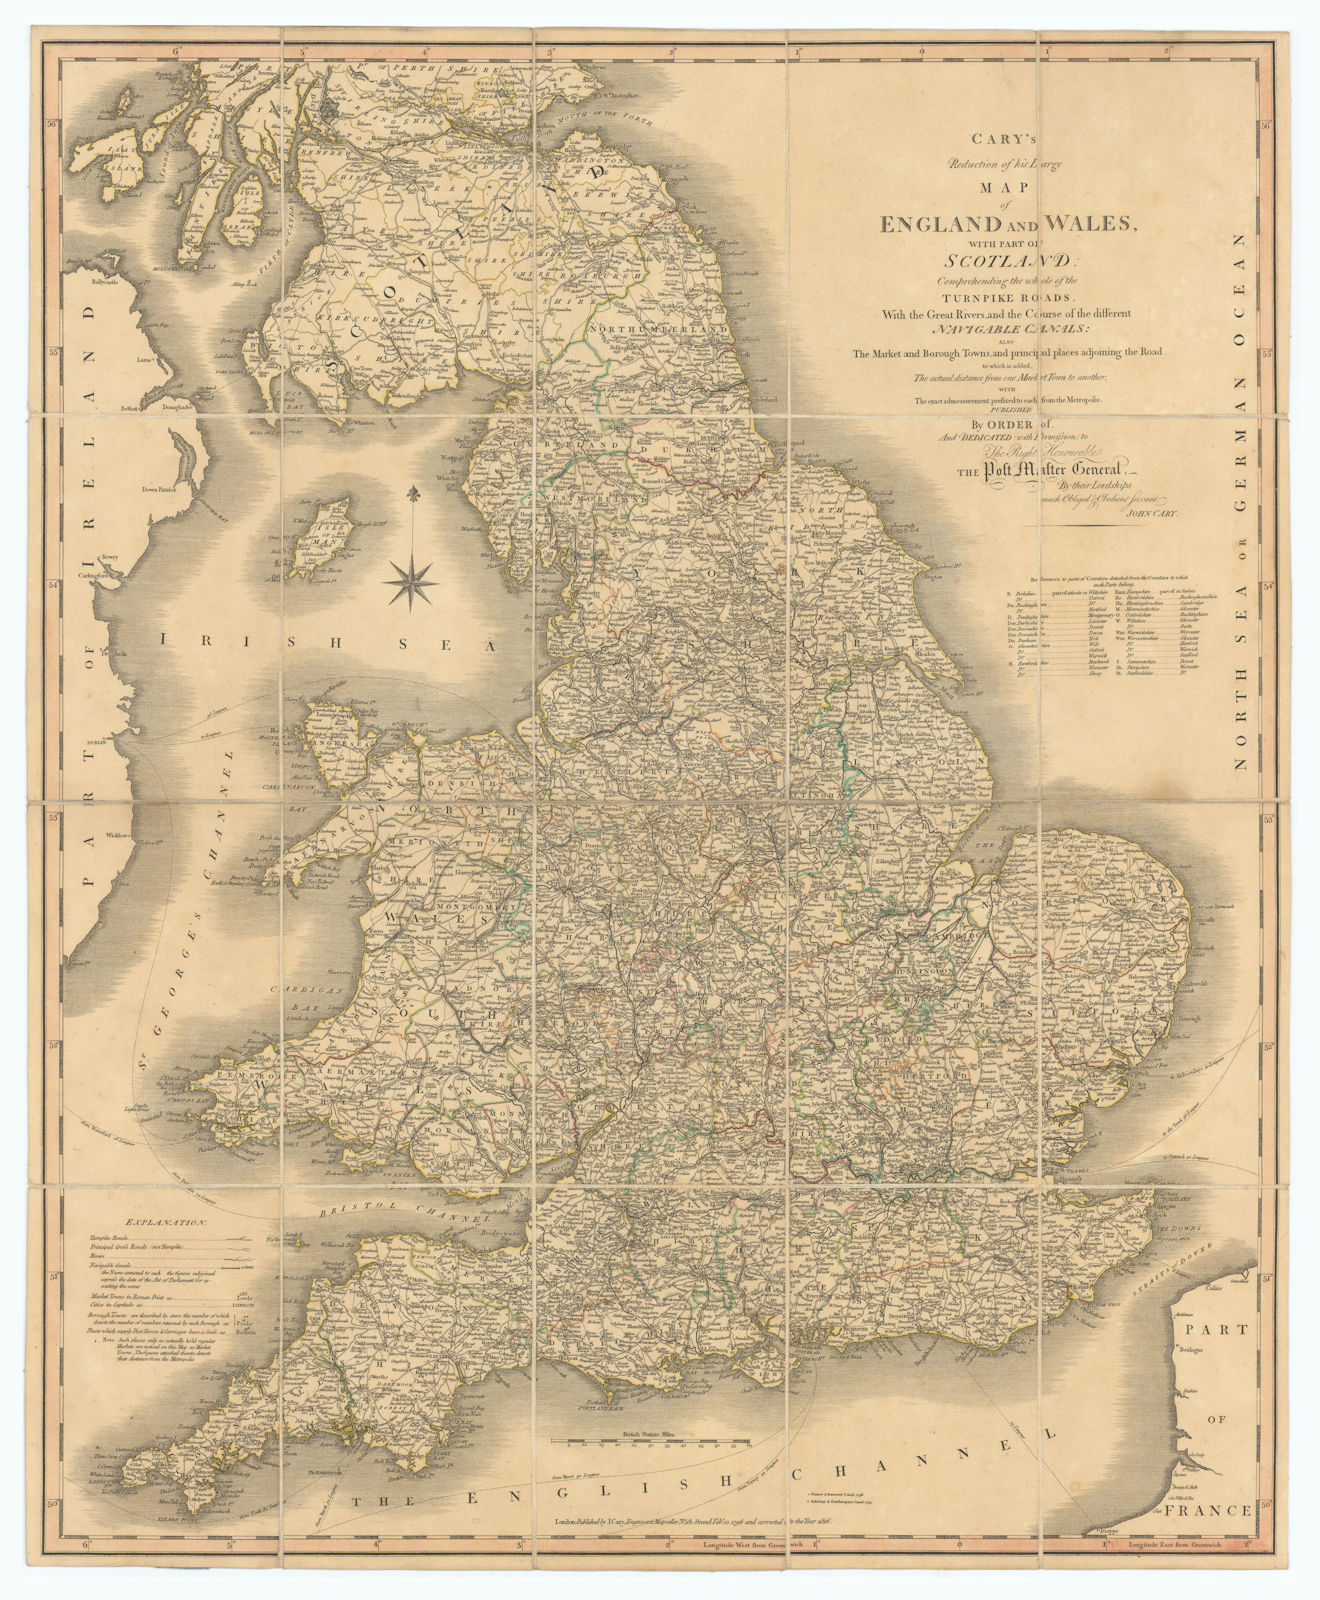 'Cary's reduction of his large map of England & Wales'. Turnpikes canals &c 1816